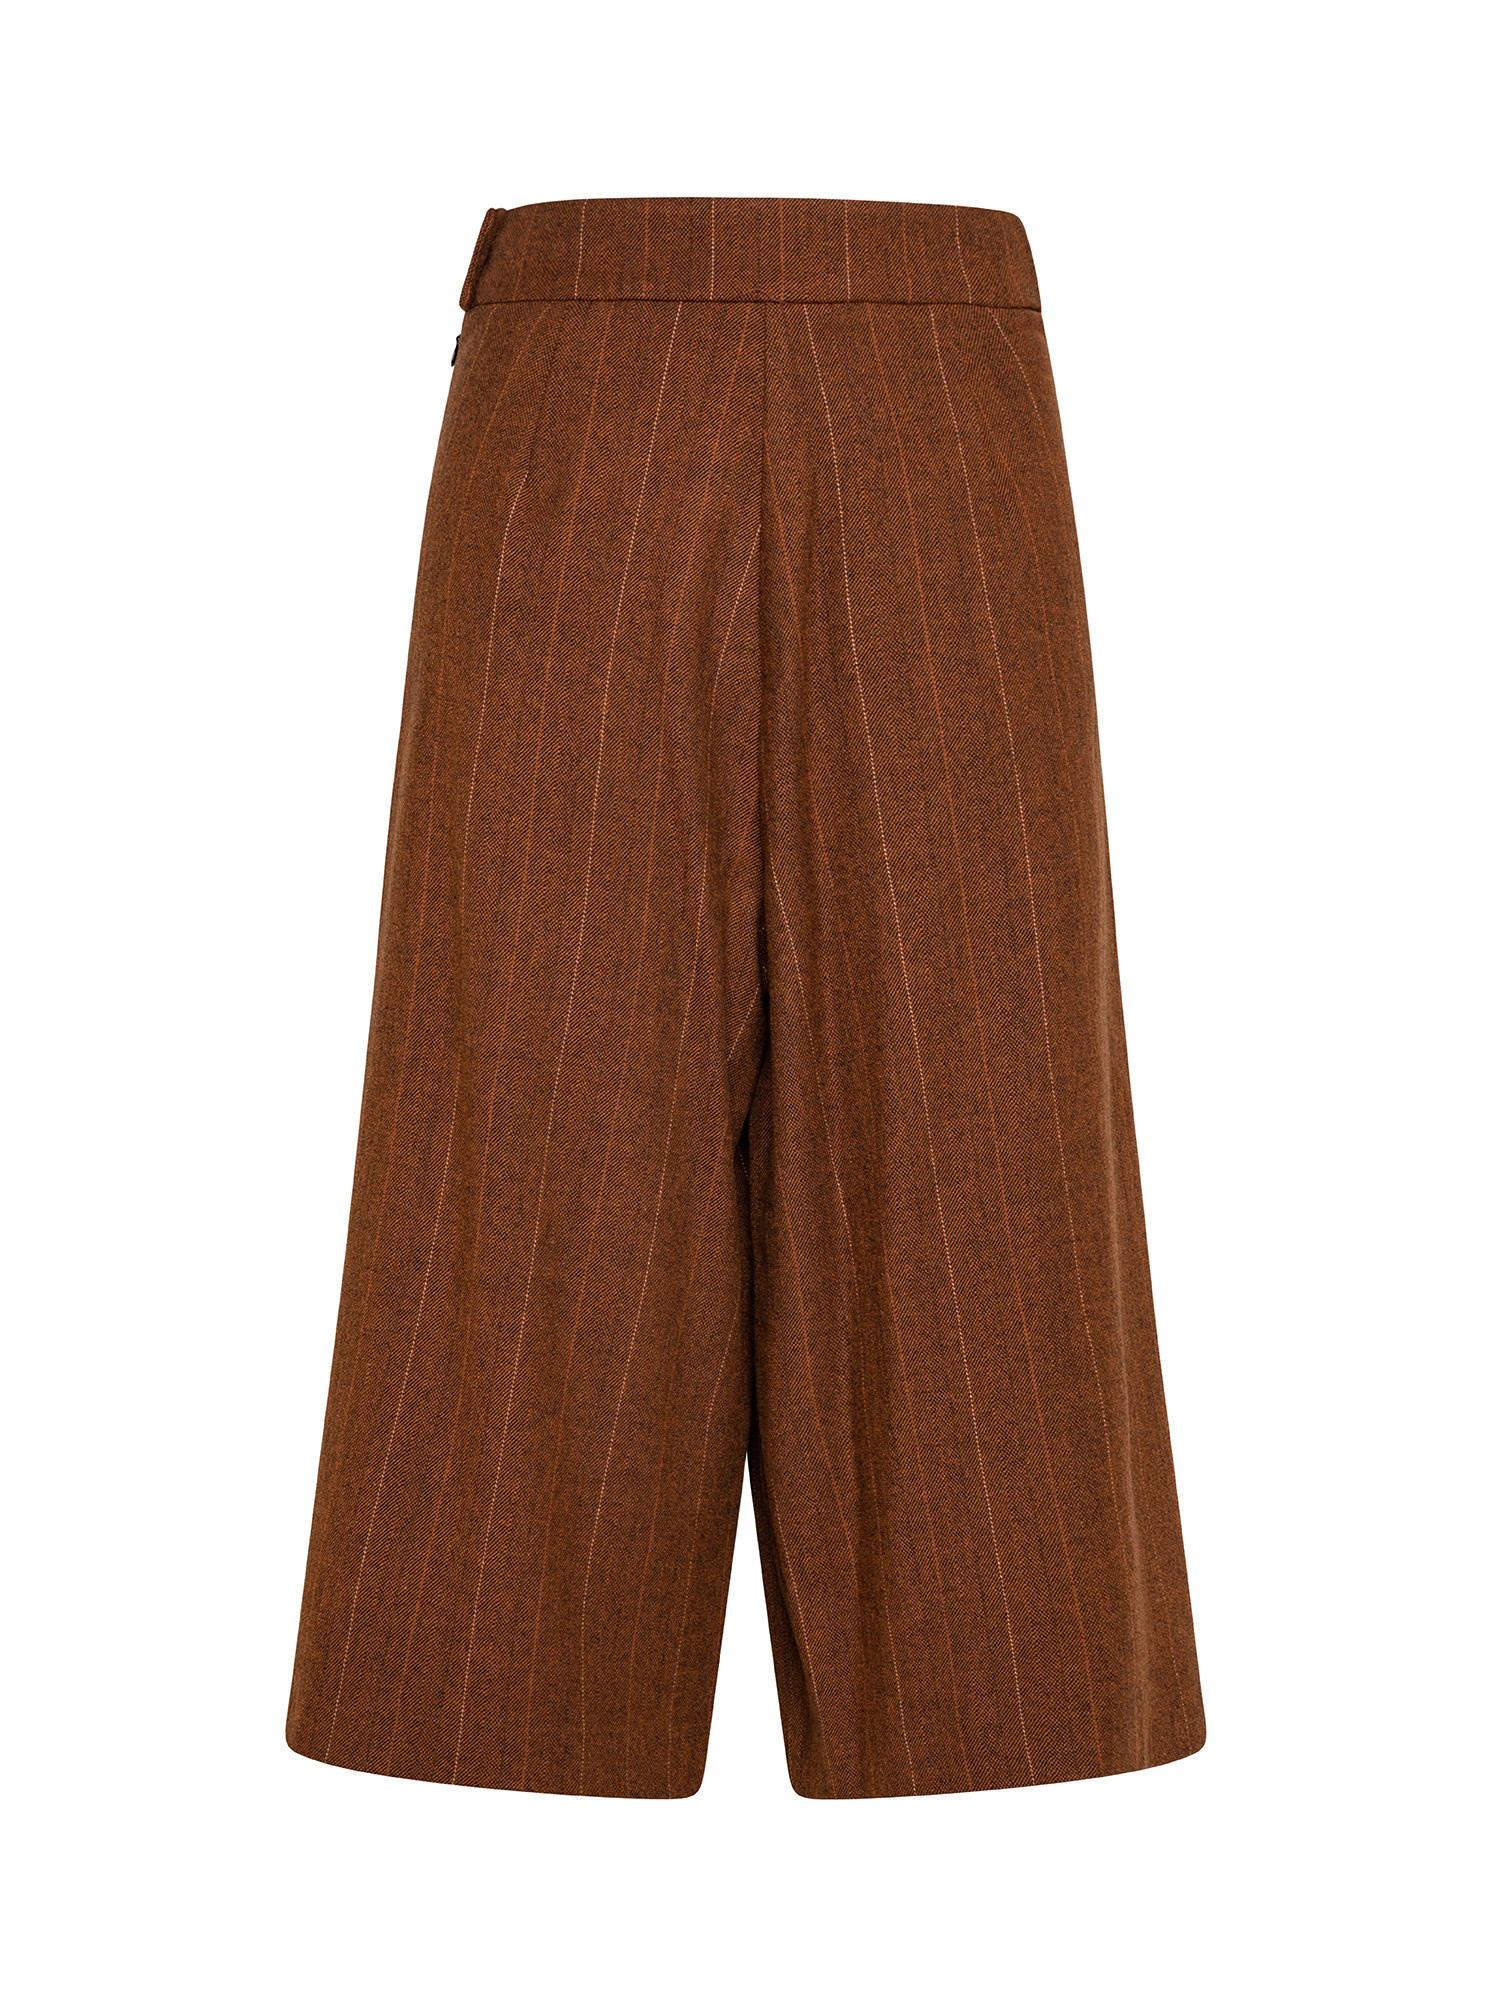 Maxi shorts in flanella, Brown, large image number 1